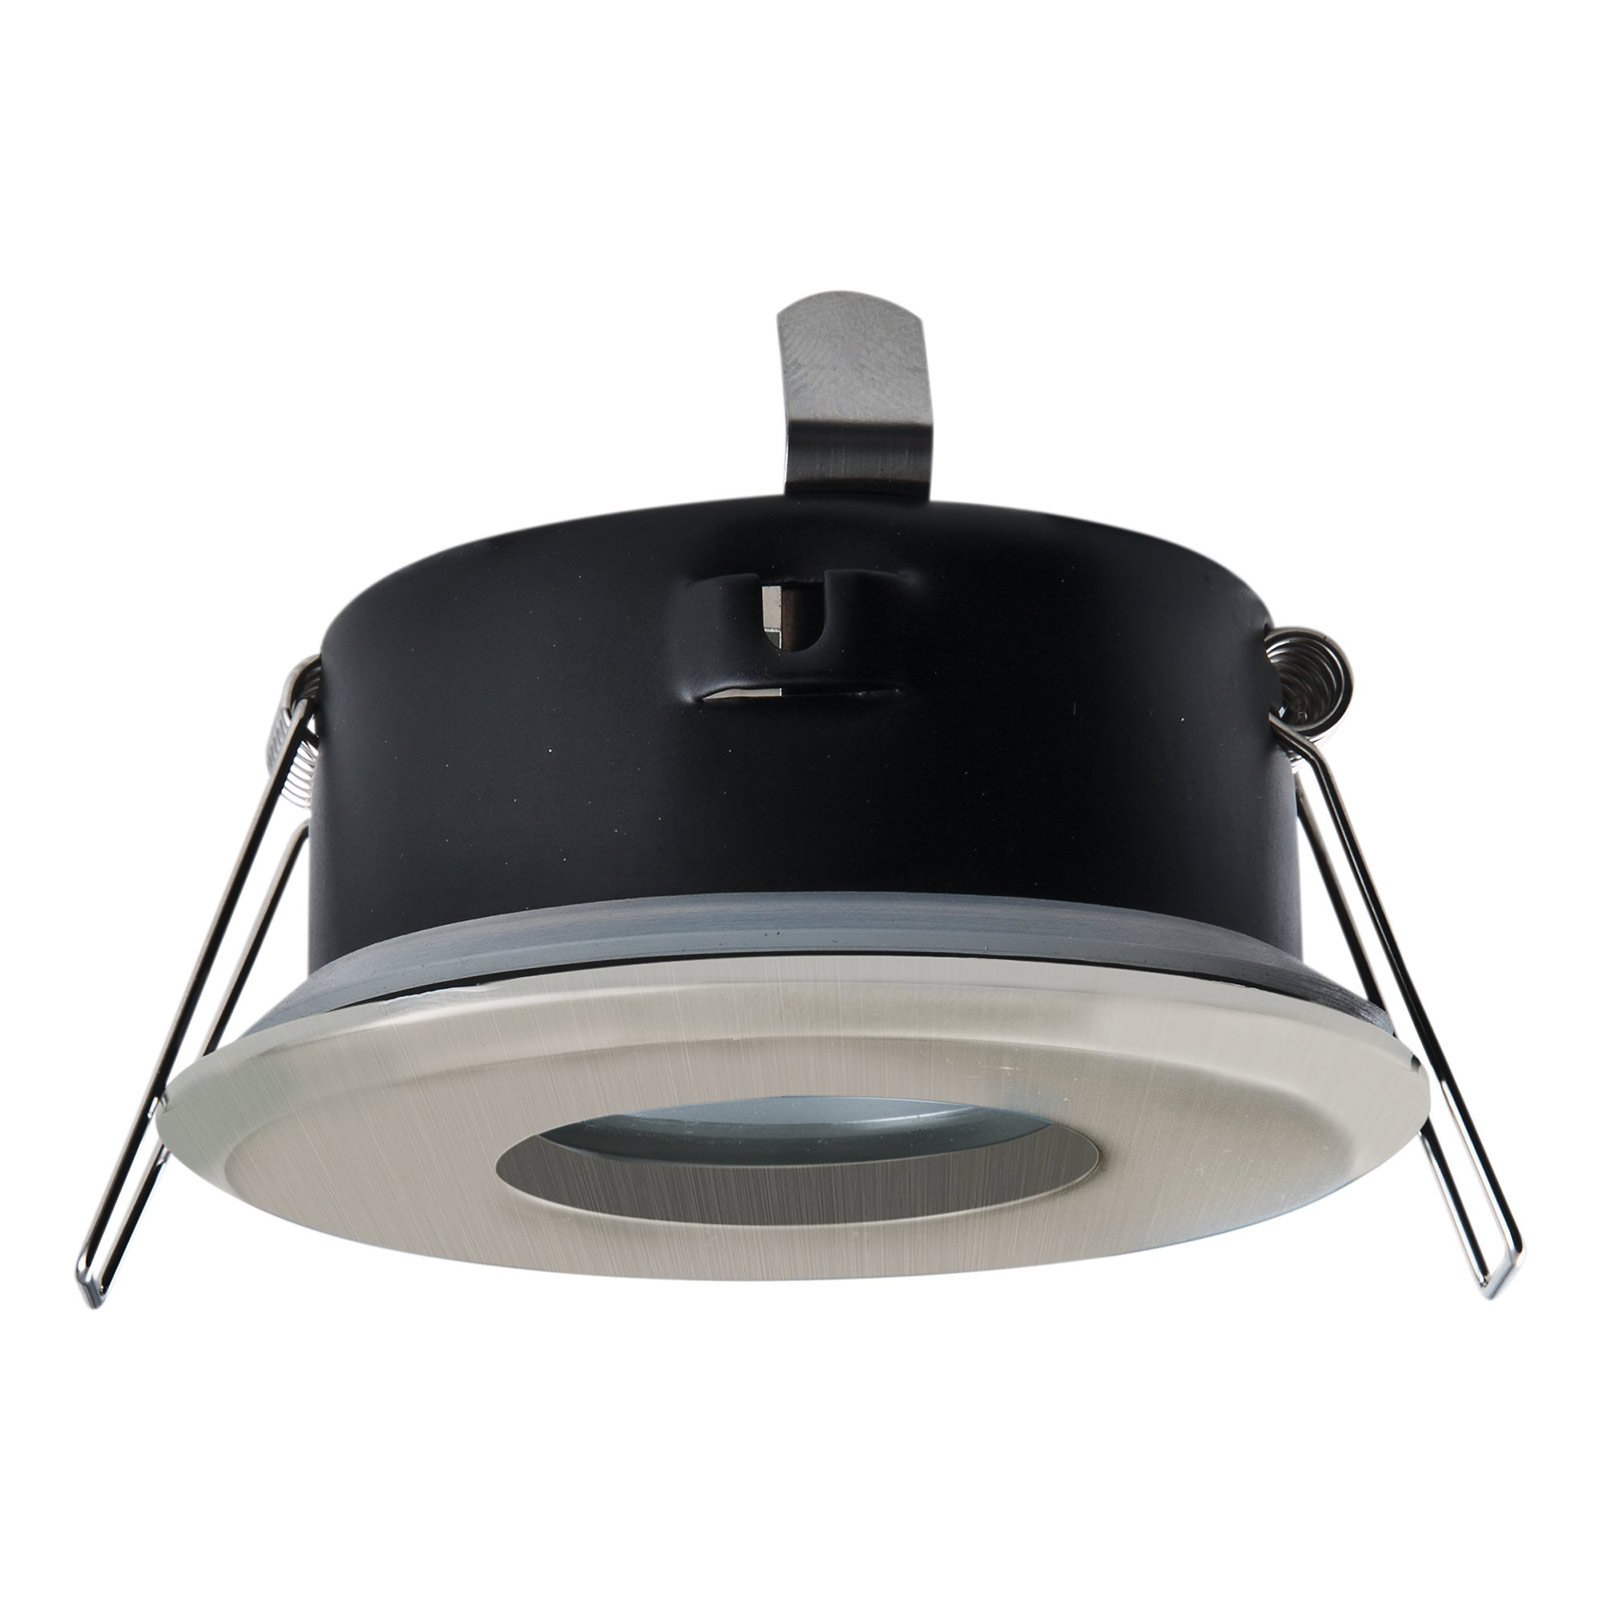 DL7001 high-voltage downlight, brushed iron